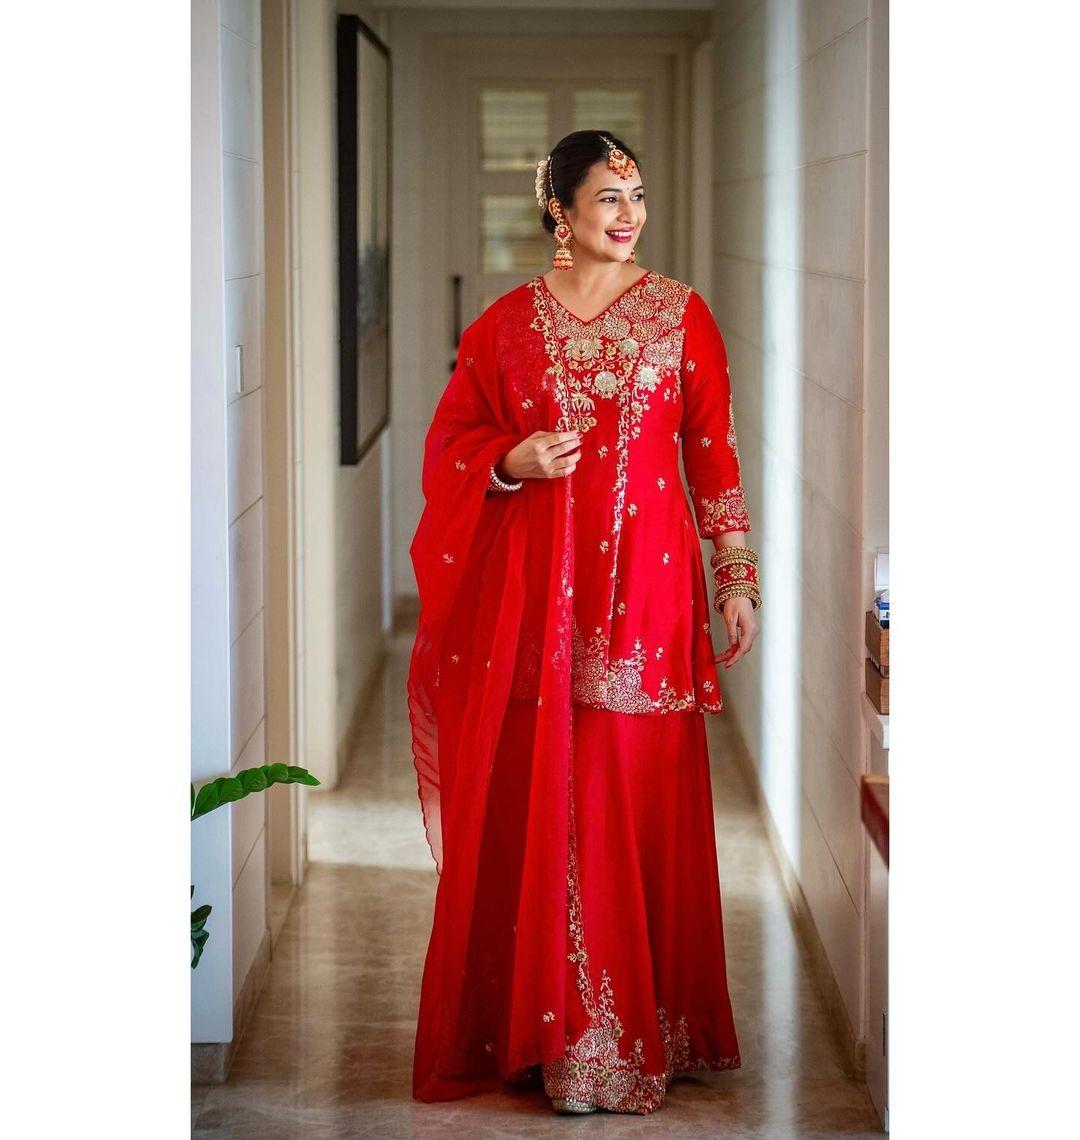 Divyanka Tripathi can ace any outfit, and her appearance in a red suit is proof. In this look, Divyanka wore a beautifully embroidered red suit paired with a matching long skirt and dupatta